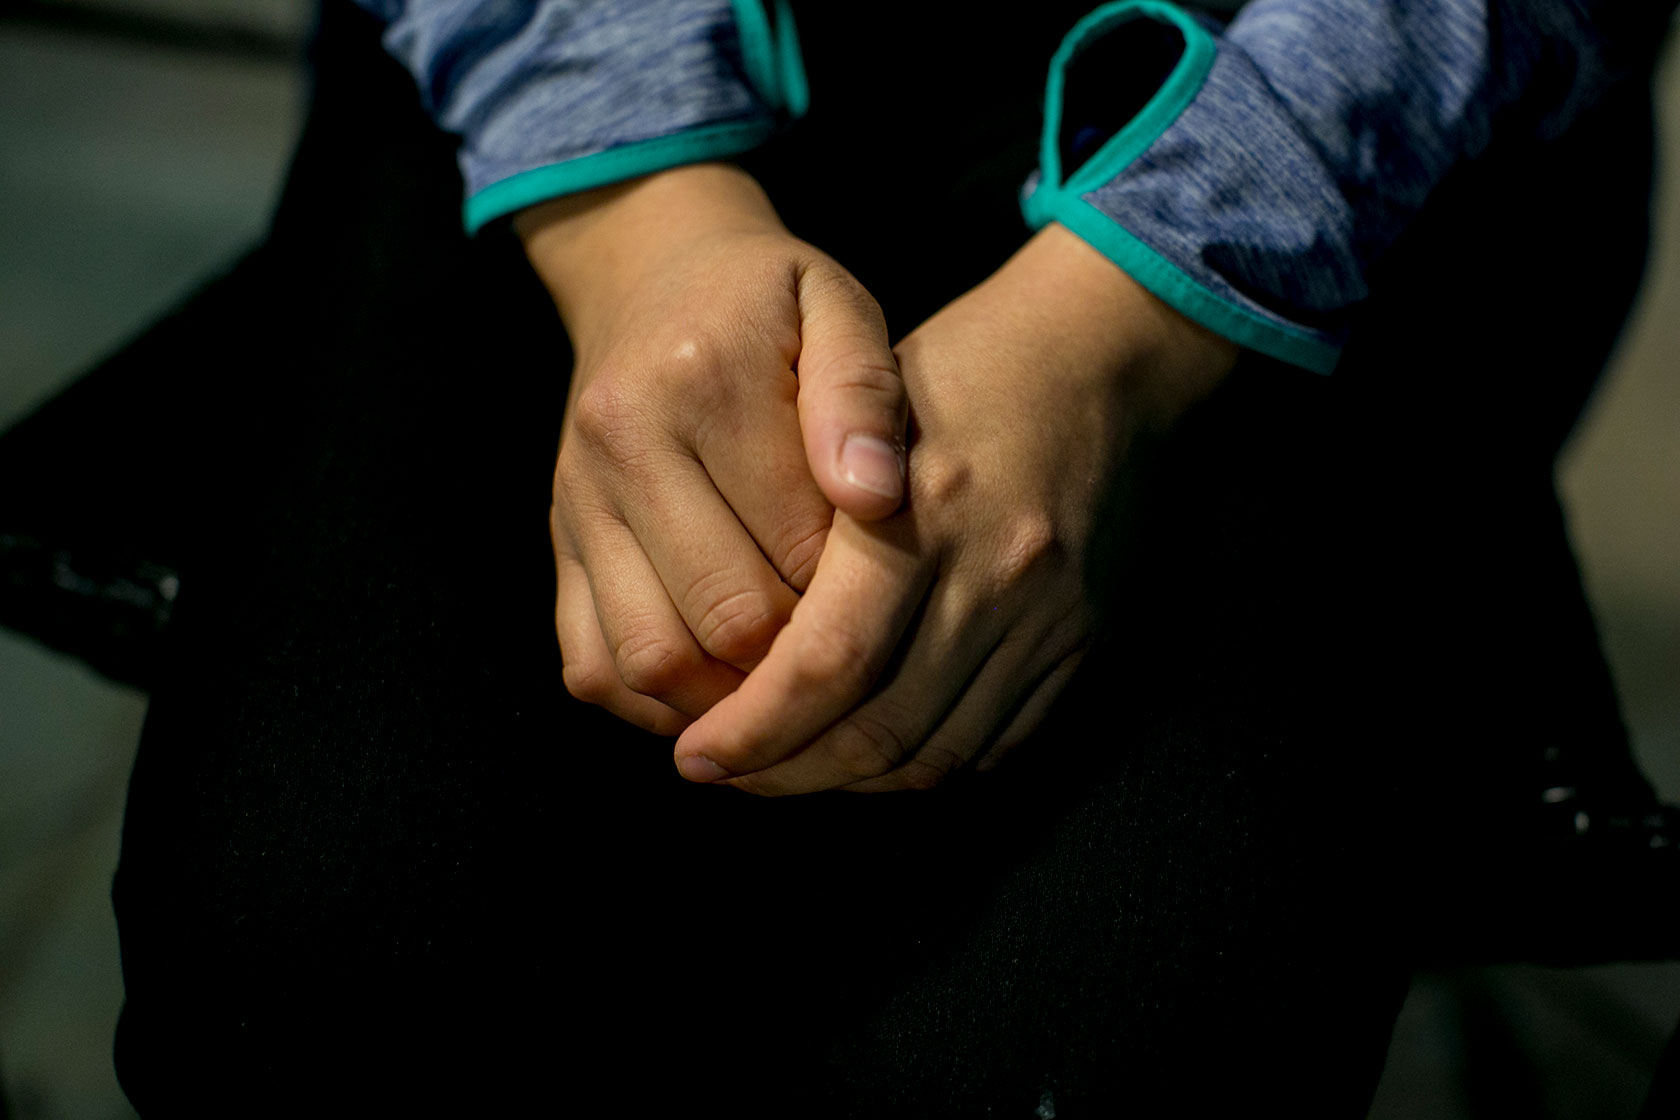 Photo shows a closeup of a woman's hands, with one clasped around the other